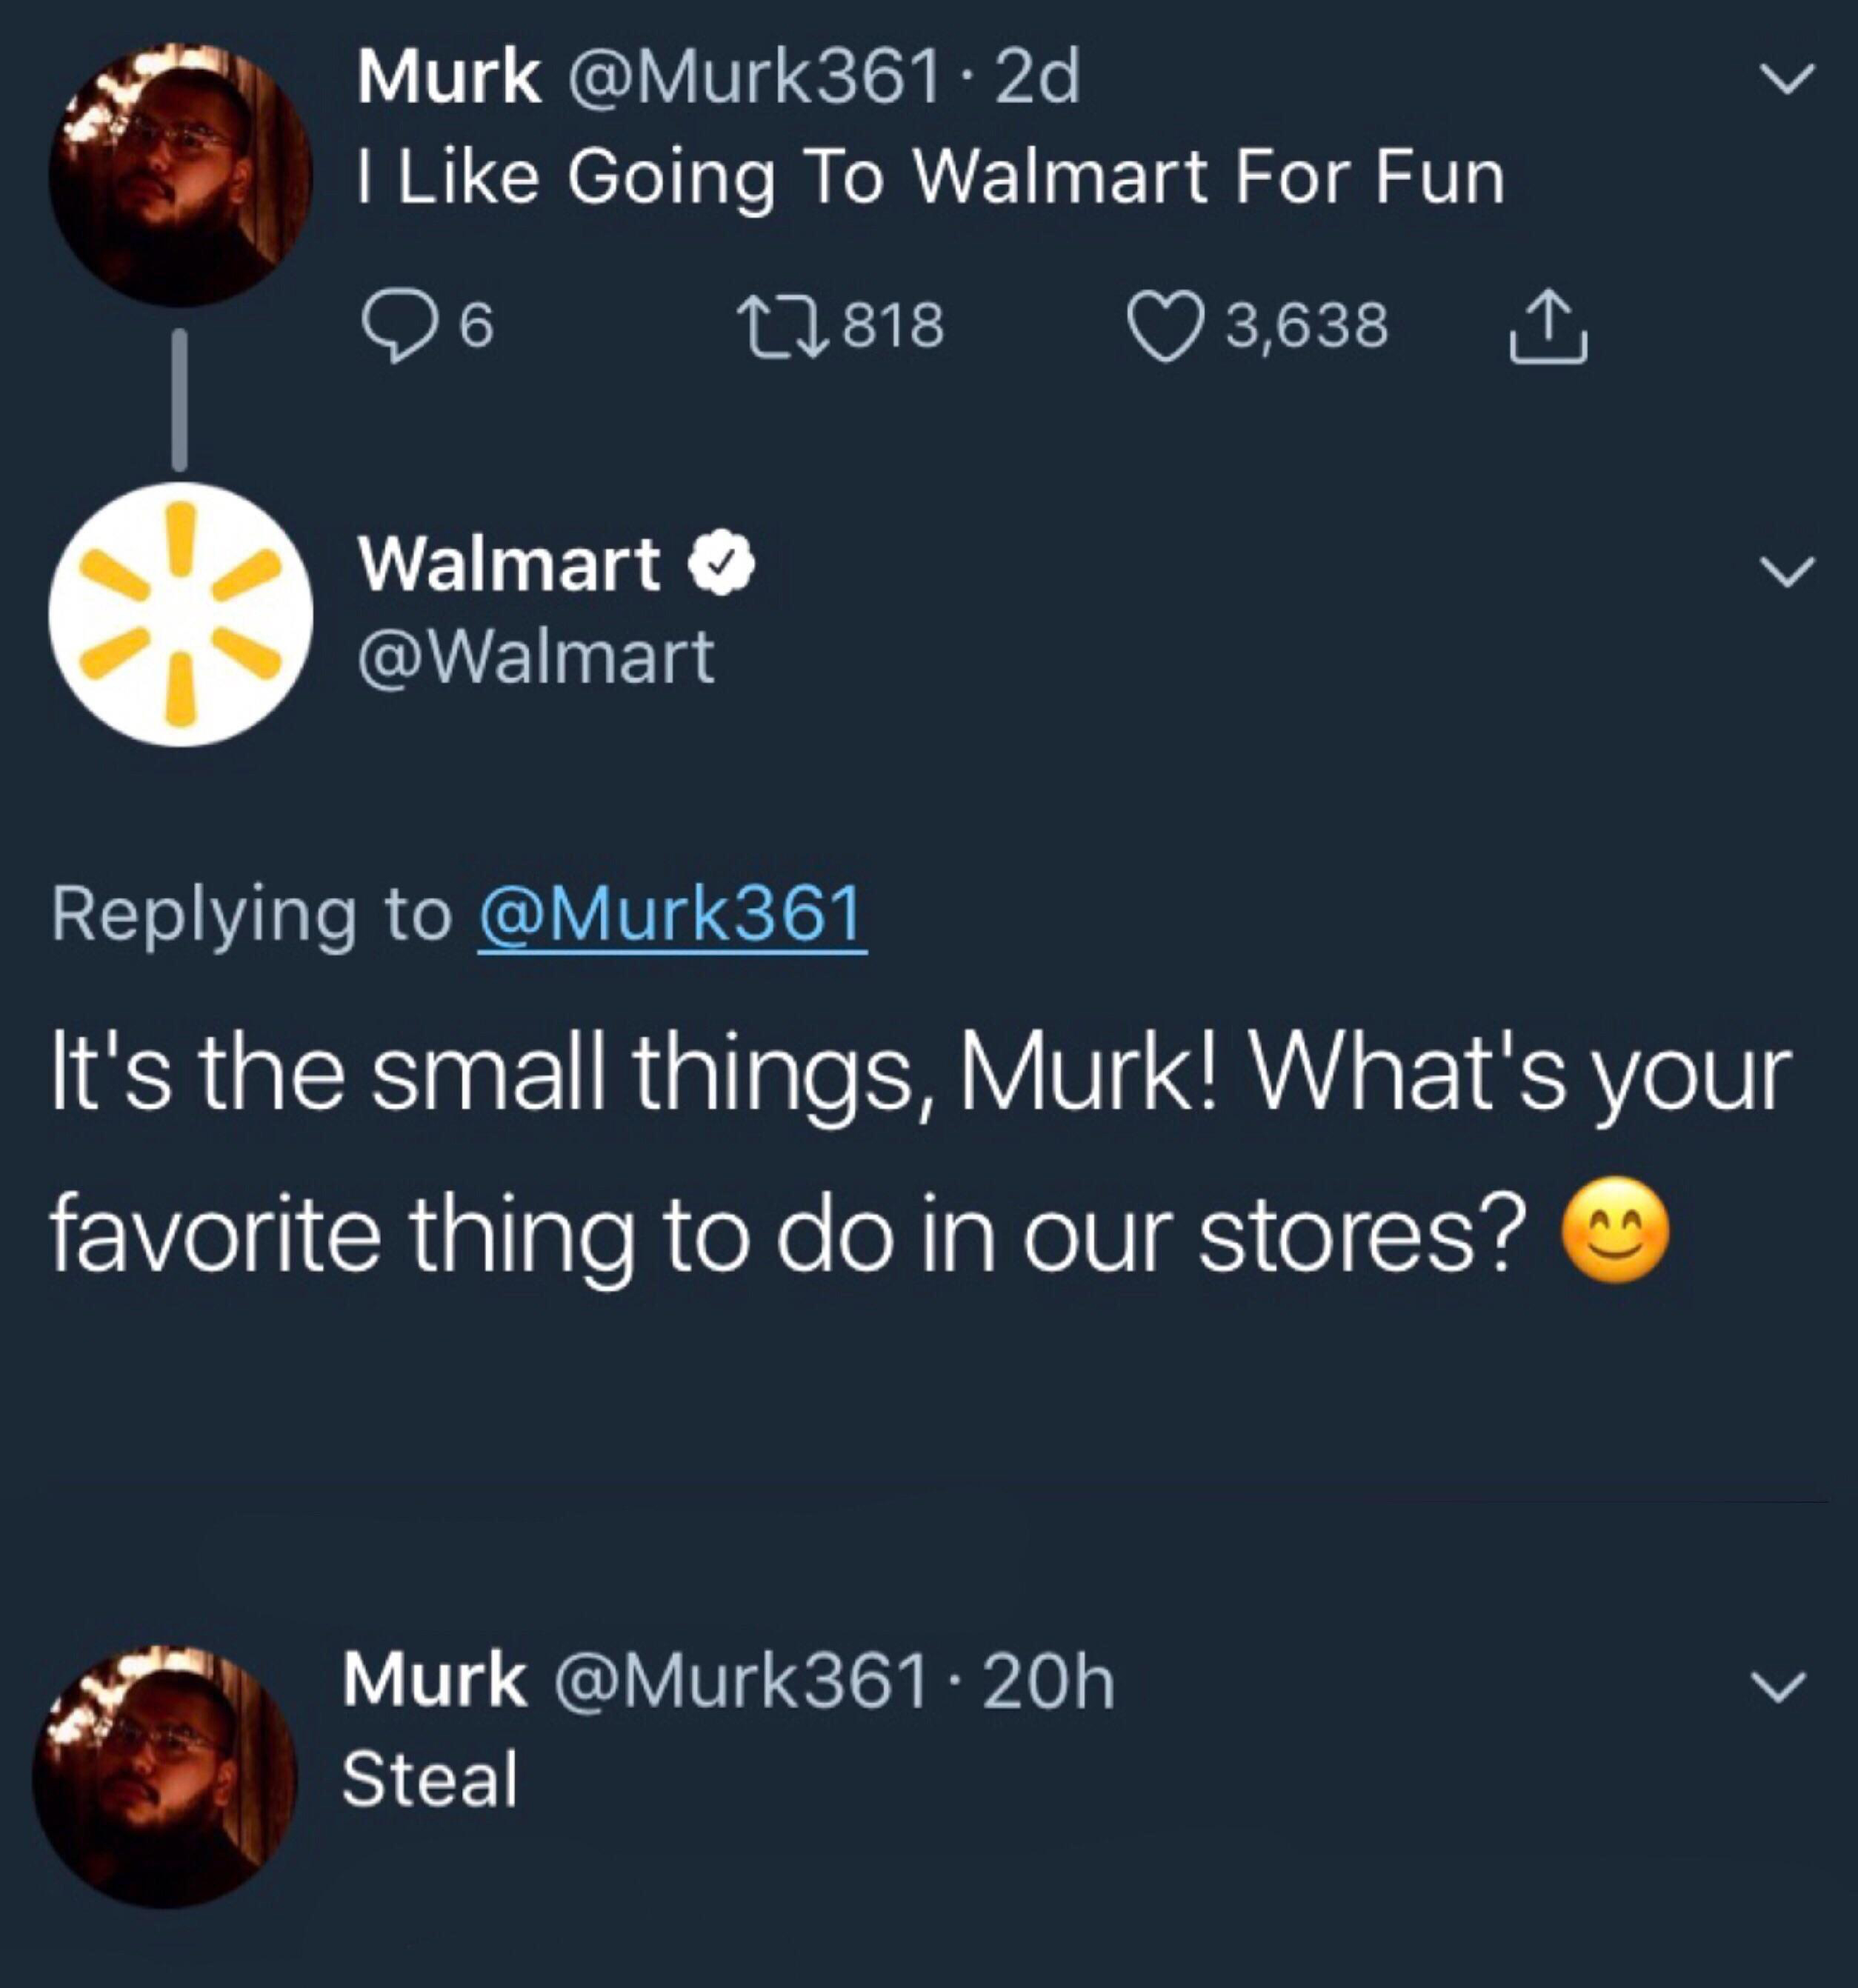 screenshot - Murk . 2d I Going To Walmart For Fun 9 6 12 818 3,638 1 Walmart It's the small things, Murk! What's your favorite thing to do in our stores? Murk 20h Steal